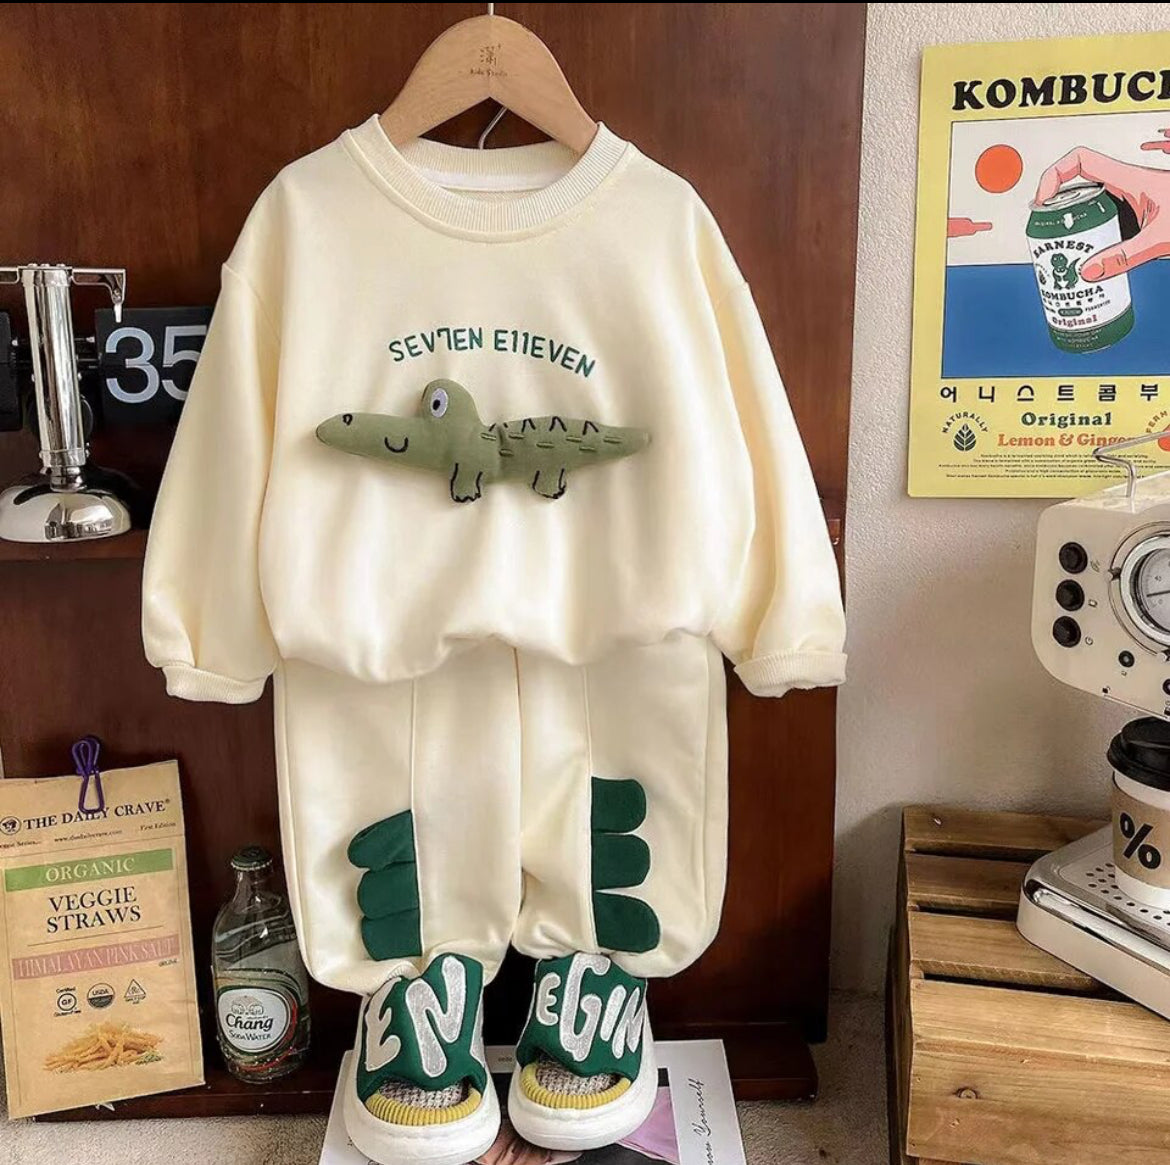 Alligator, Two Piece Set.   Sweater +Pant Baby Clothes Outfits